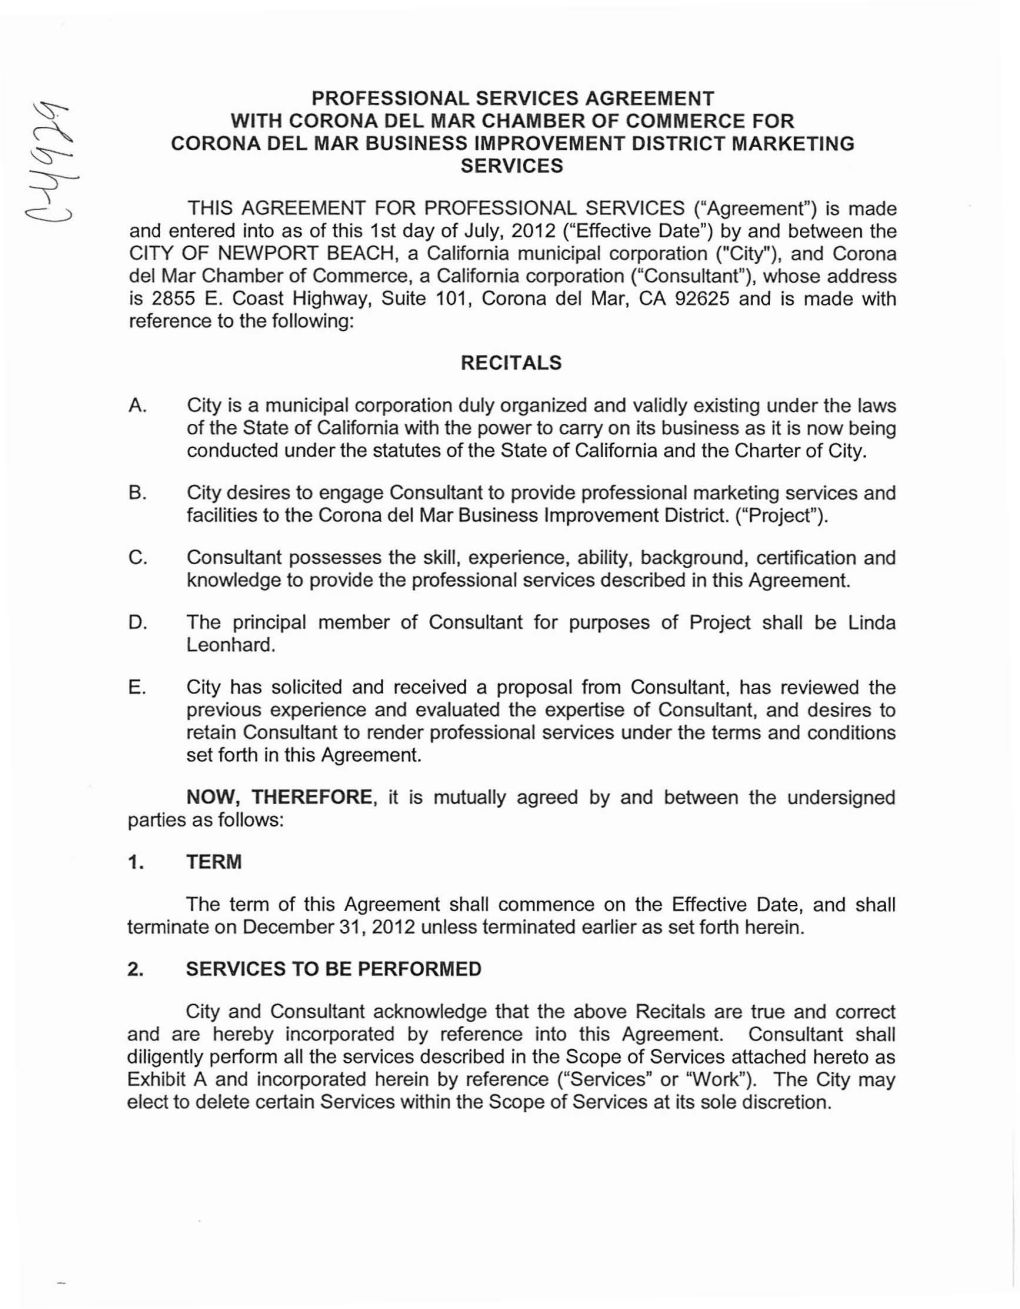 Professional Services Agreement with Corona Del Mar Chamber of Commerce for Corona Del Mar Bus Iness Improvement District Marketing Services